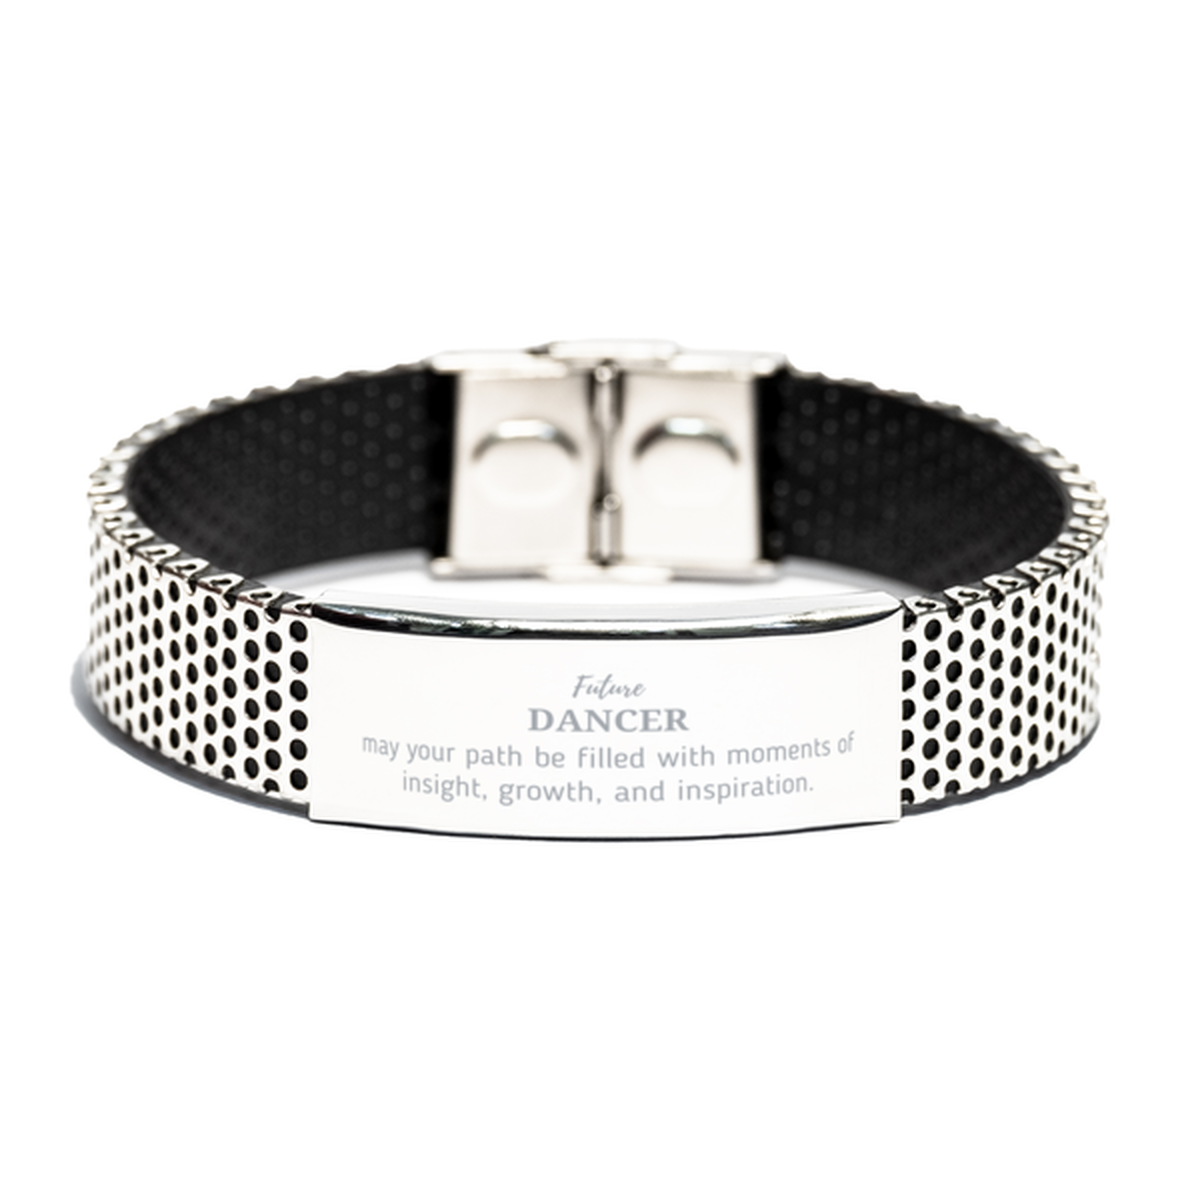 Future Dancer Gifts, May your path be filled with moments of insight, Graduation Gifts for New Dancer, Christmas Unique Stainless Steel Bracelet For Men, Women, Friends